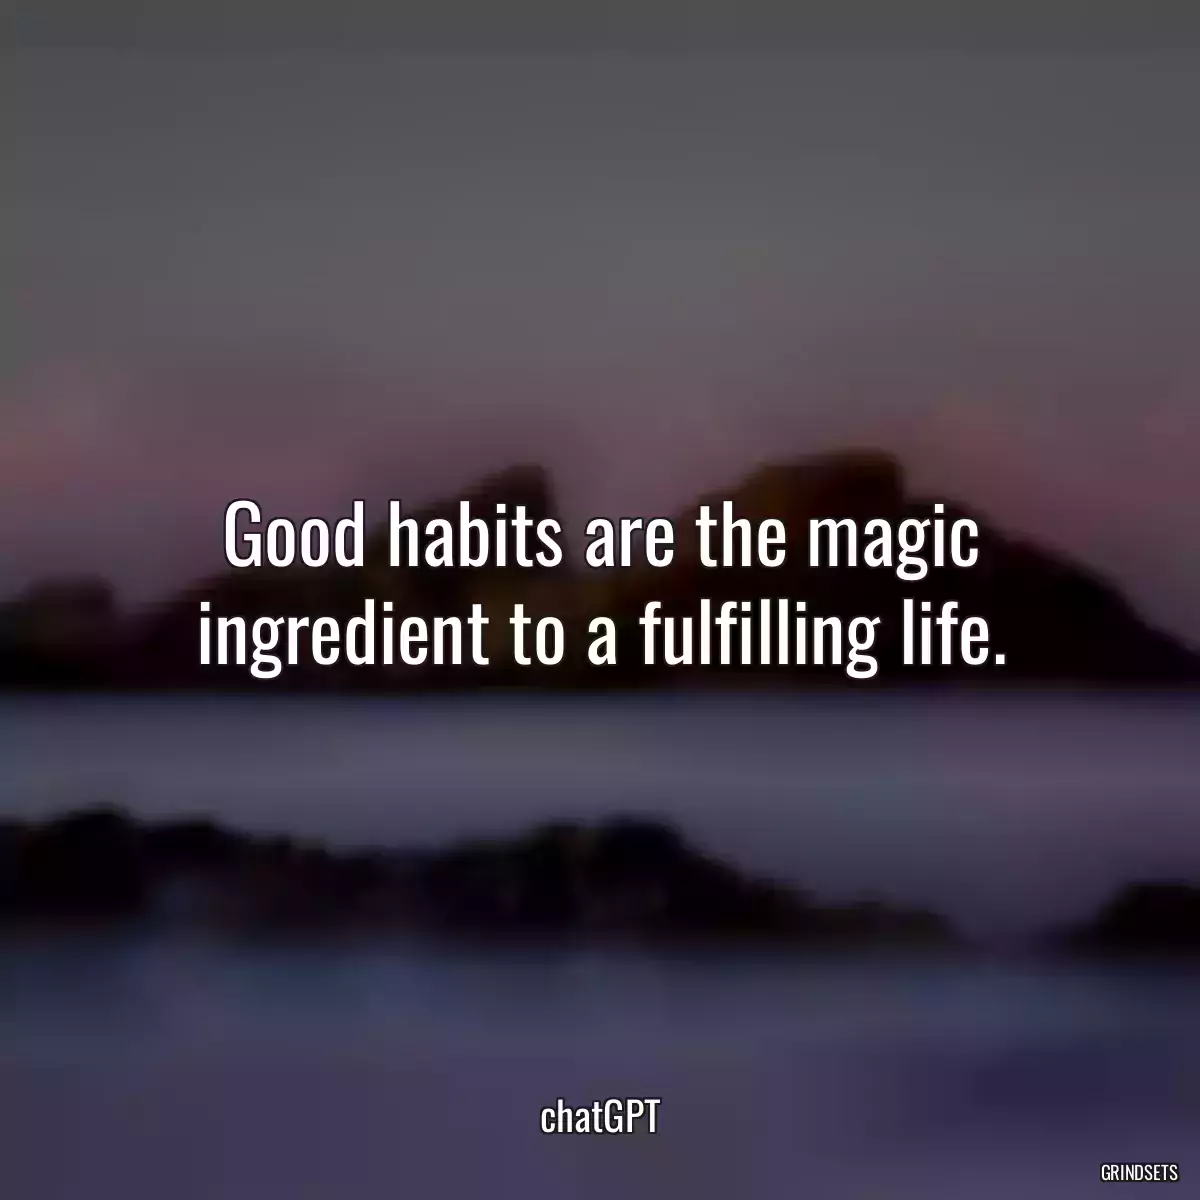 Good habits are the magic ingredient to a fulfilling life.